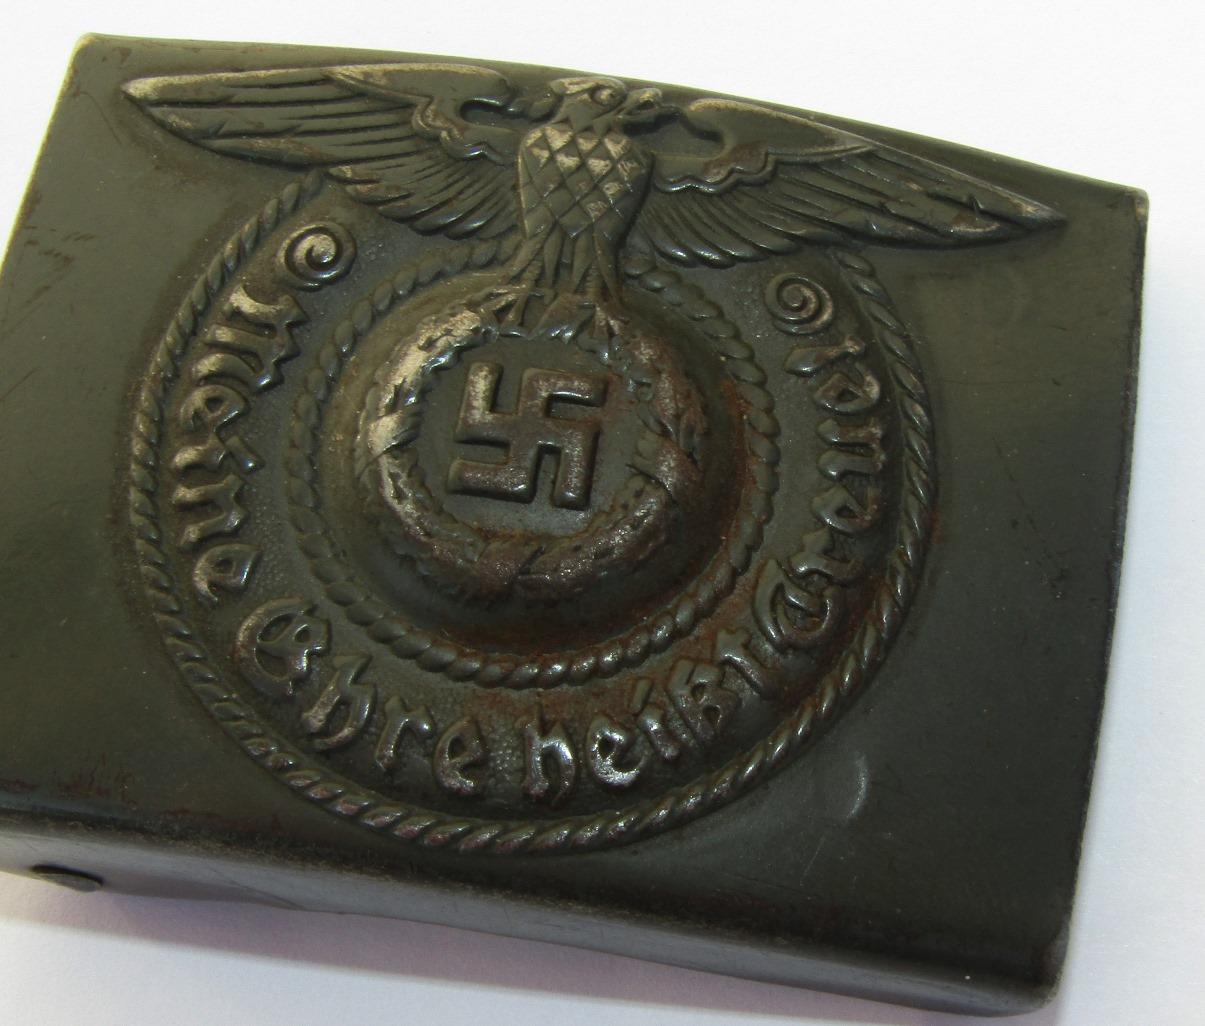 Original WW2 Period Waffen SS Belt Buckle For EM with Rare OD Paint Combat Finish By RODO